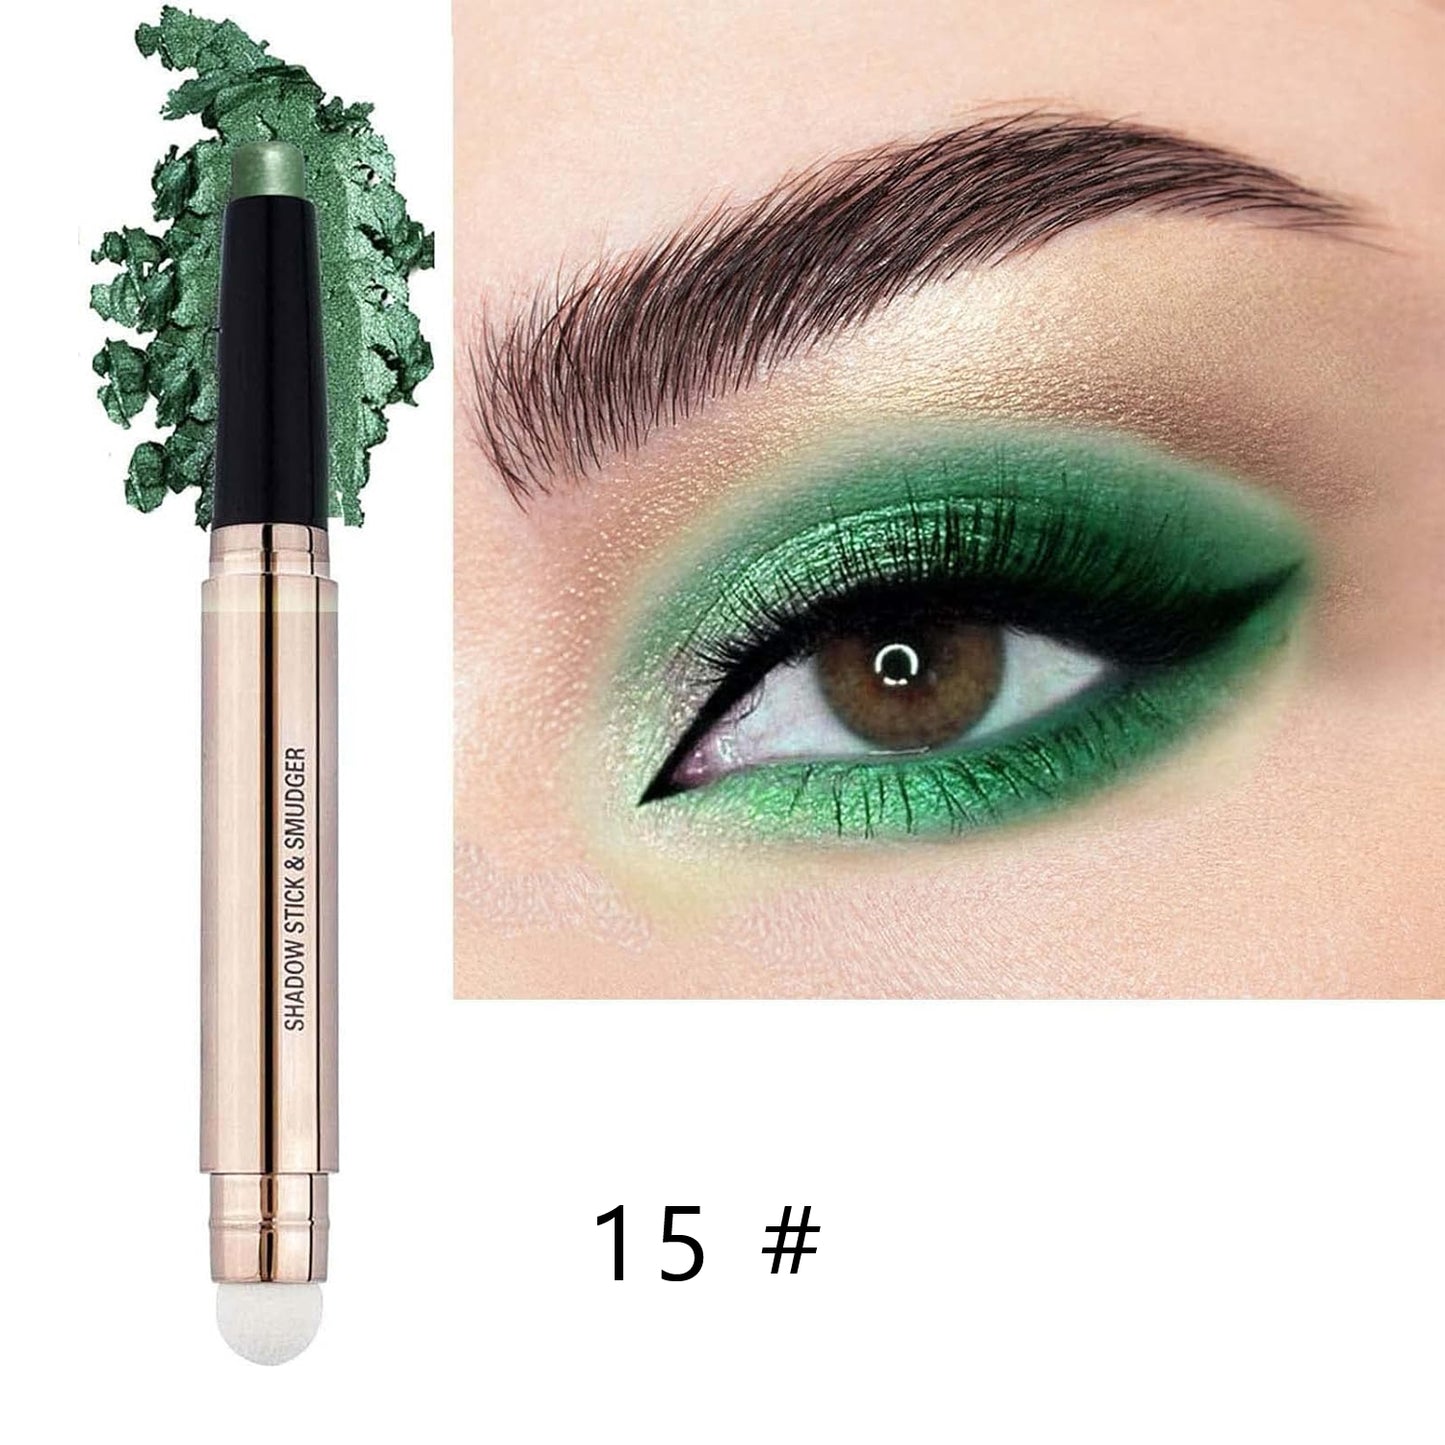 color 15# birght green eyeshadow 40201000 with smudger